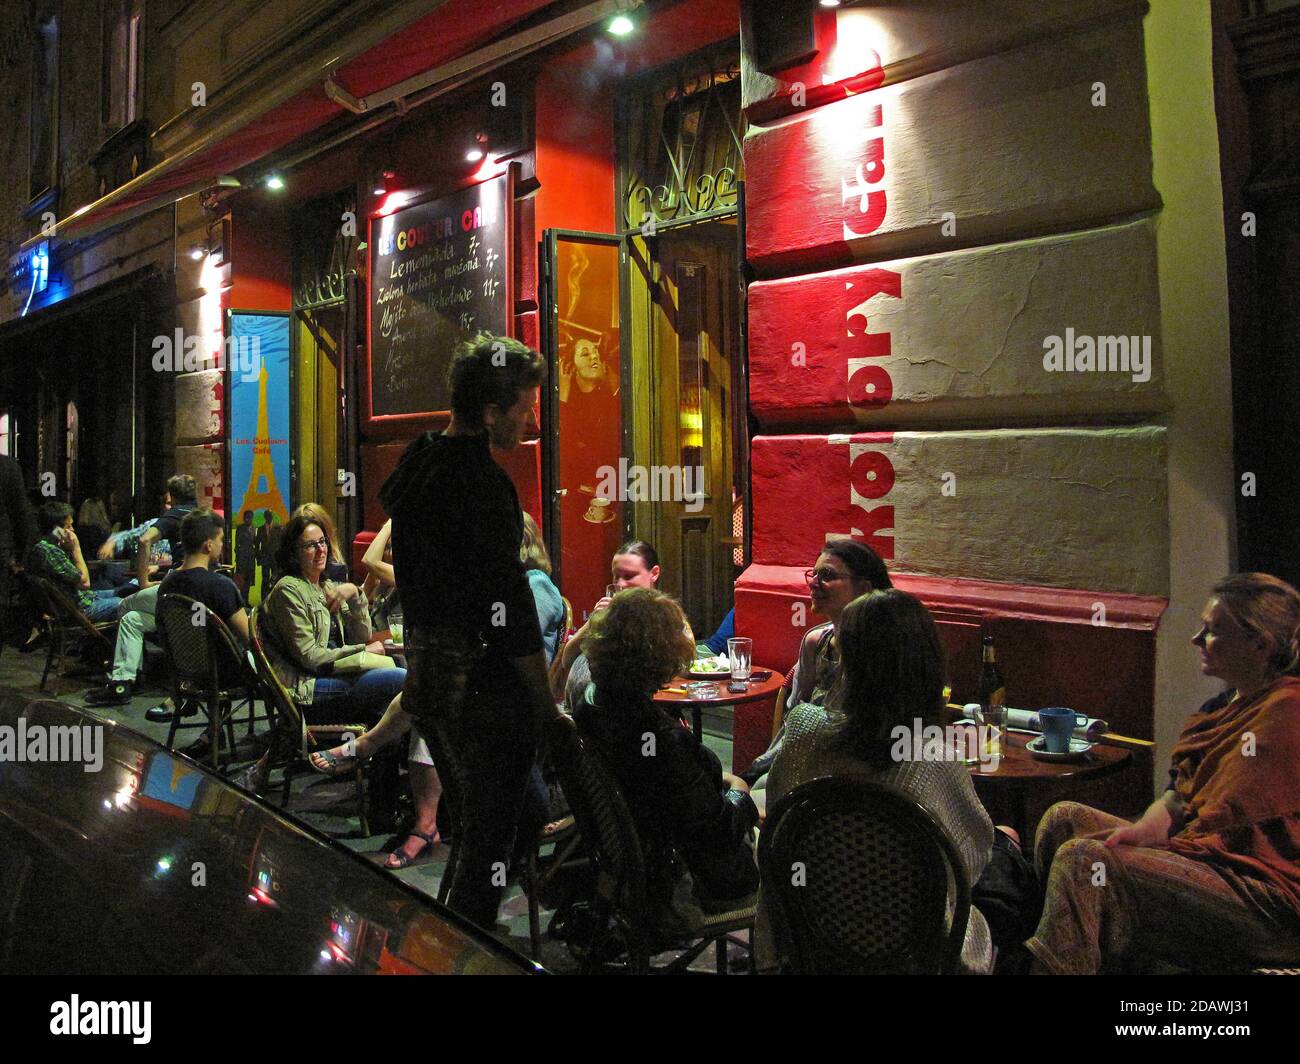 Restaurant Kolory Cafe in the evening in Kazimierz, Cracow. Stock Photo